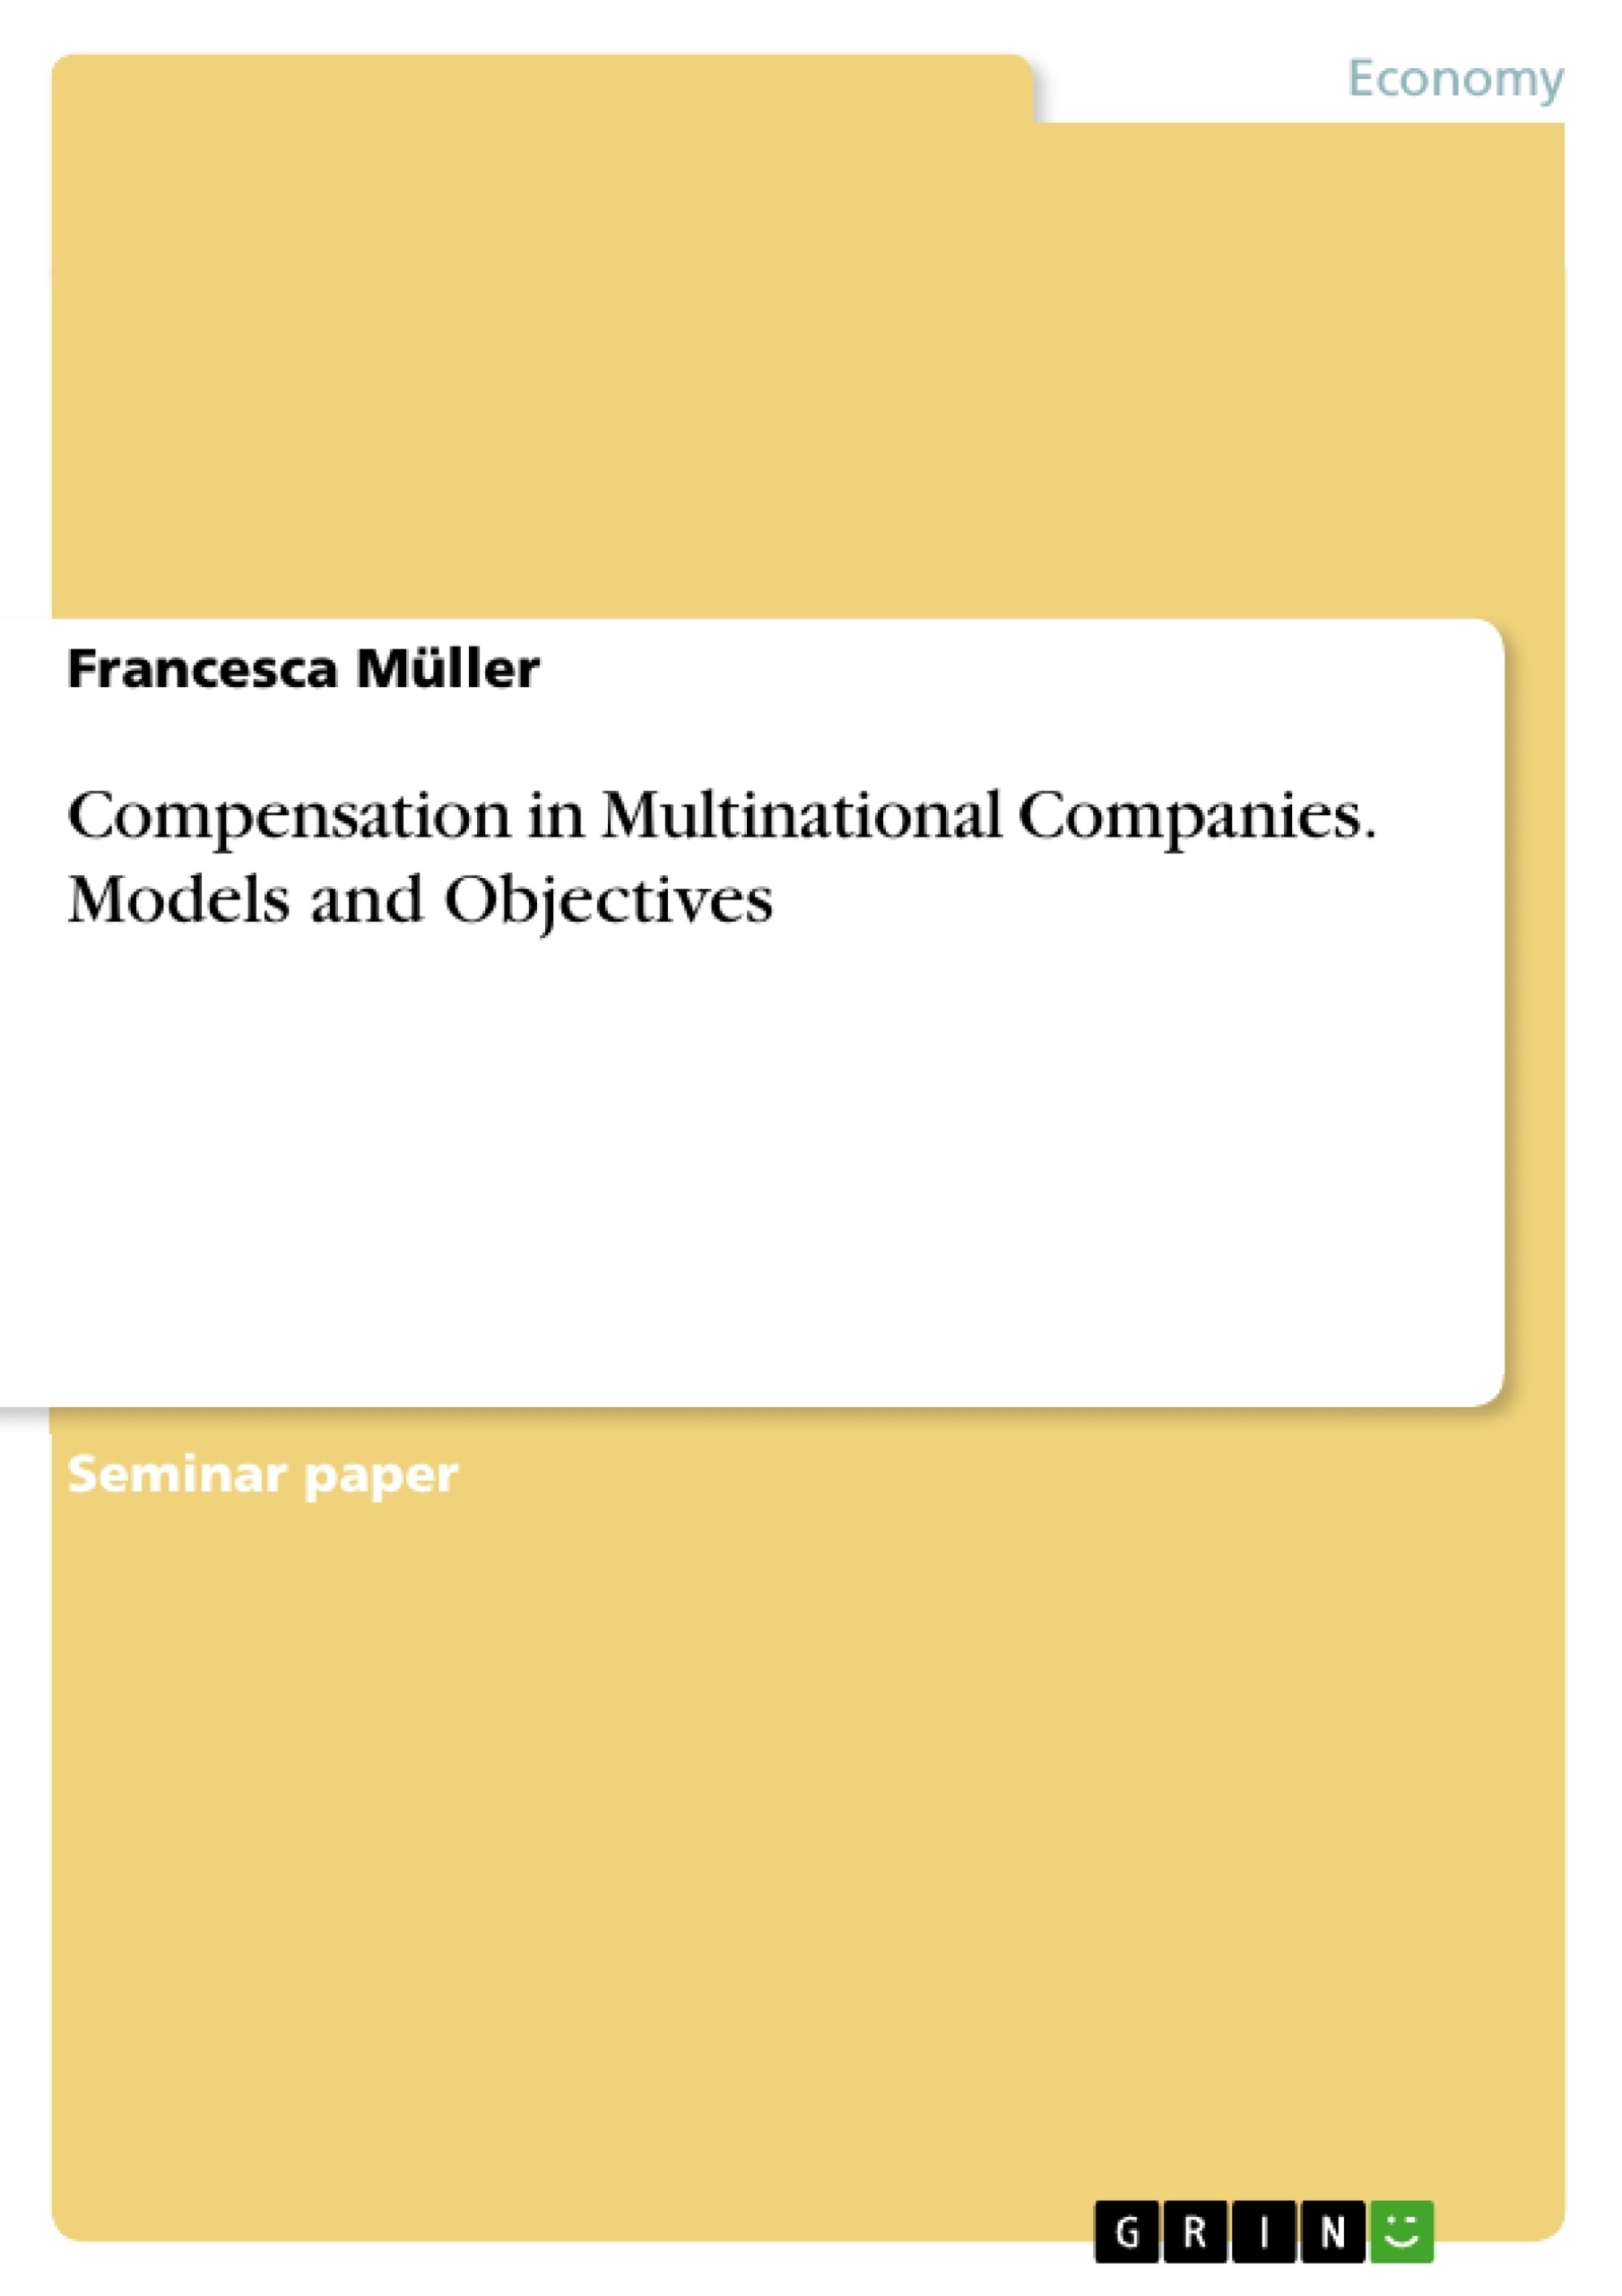 Title: Compensation in Multinational Companies. Models and Objectives